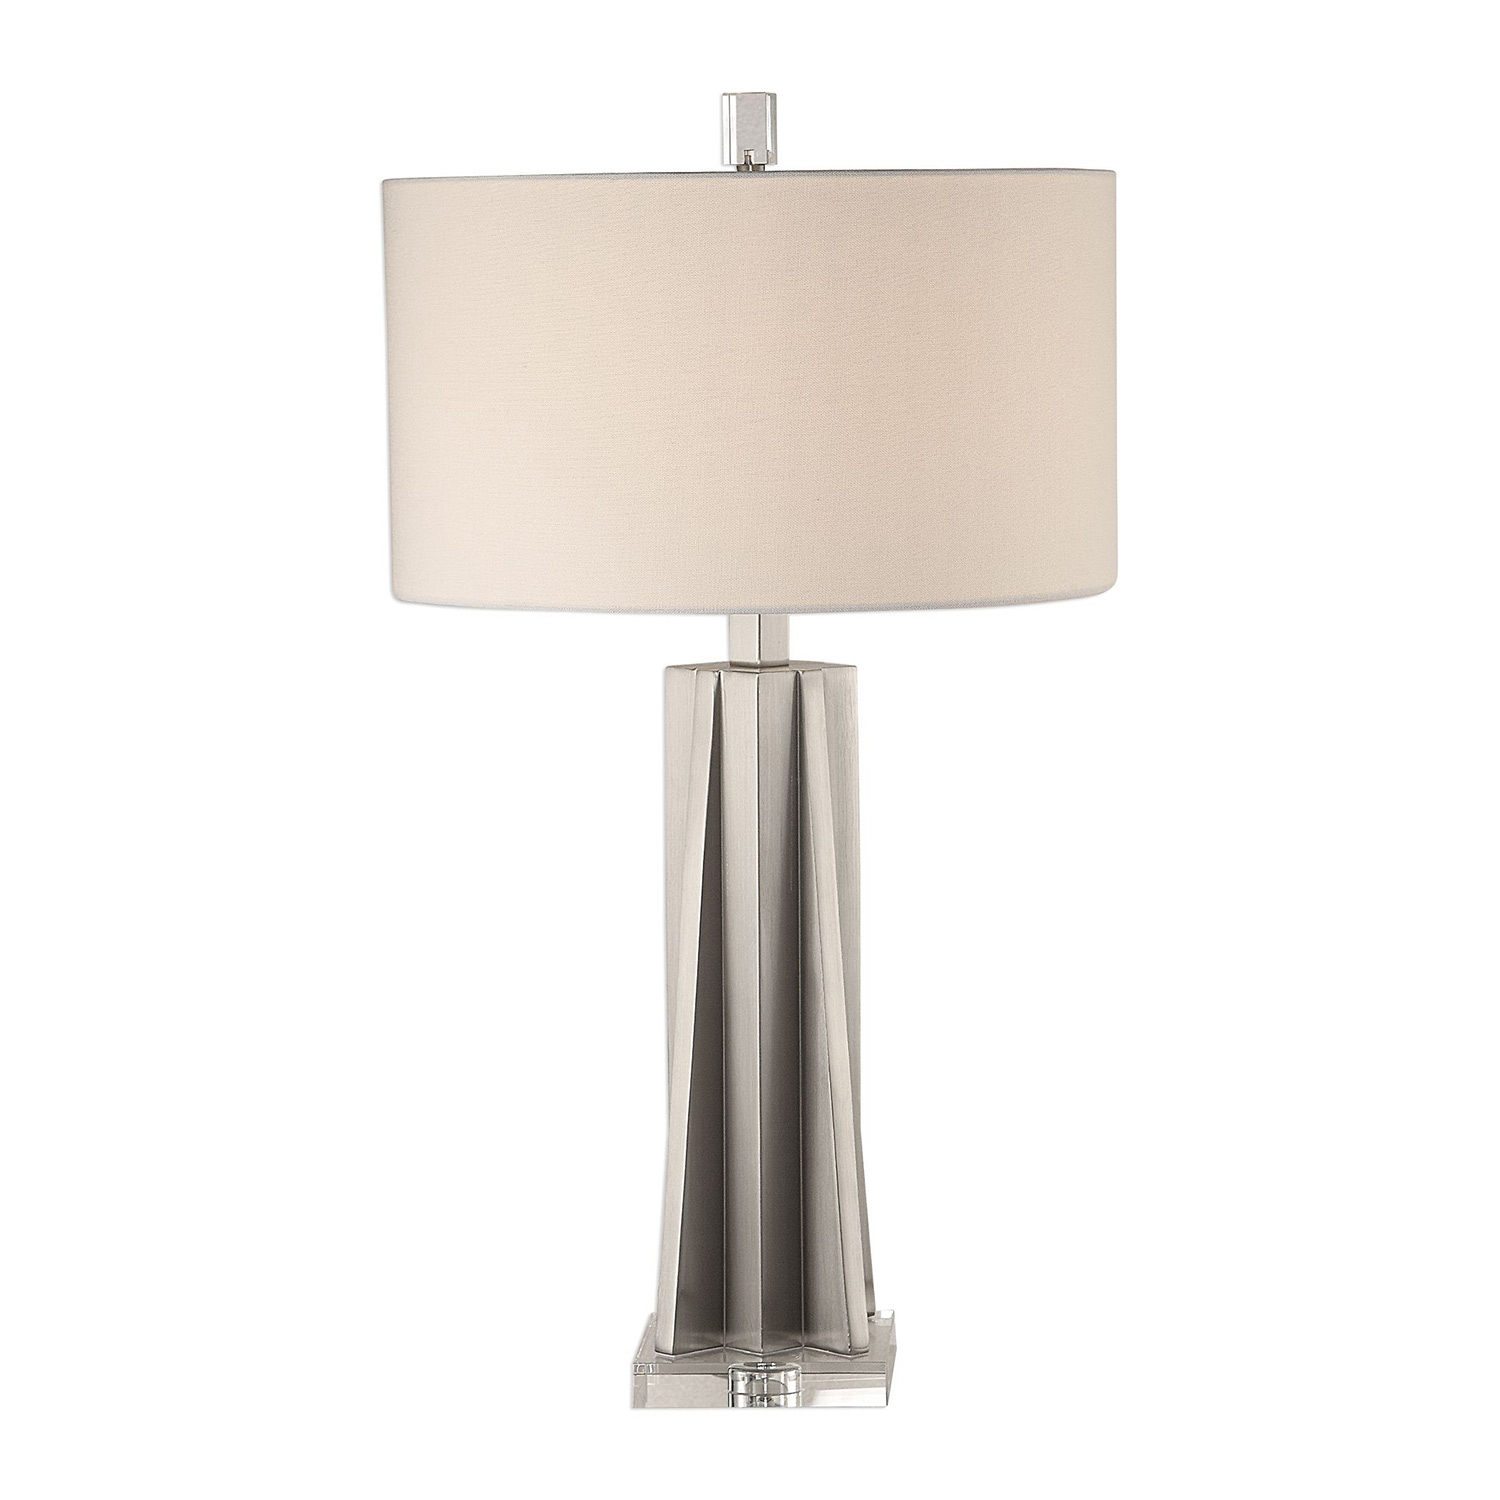 Uttermost Trinculo Lamp - Brushed Nickel